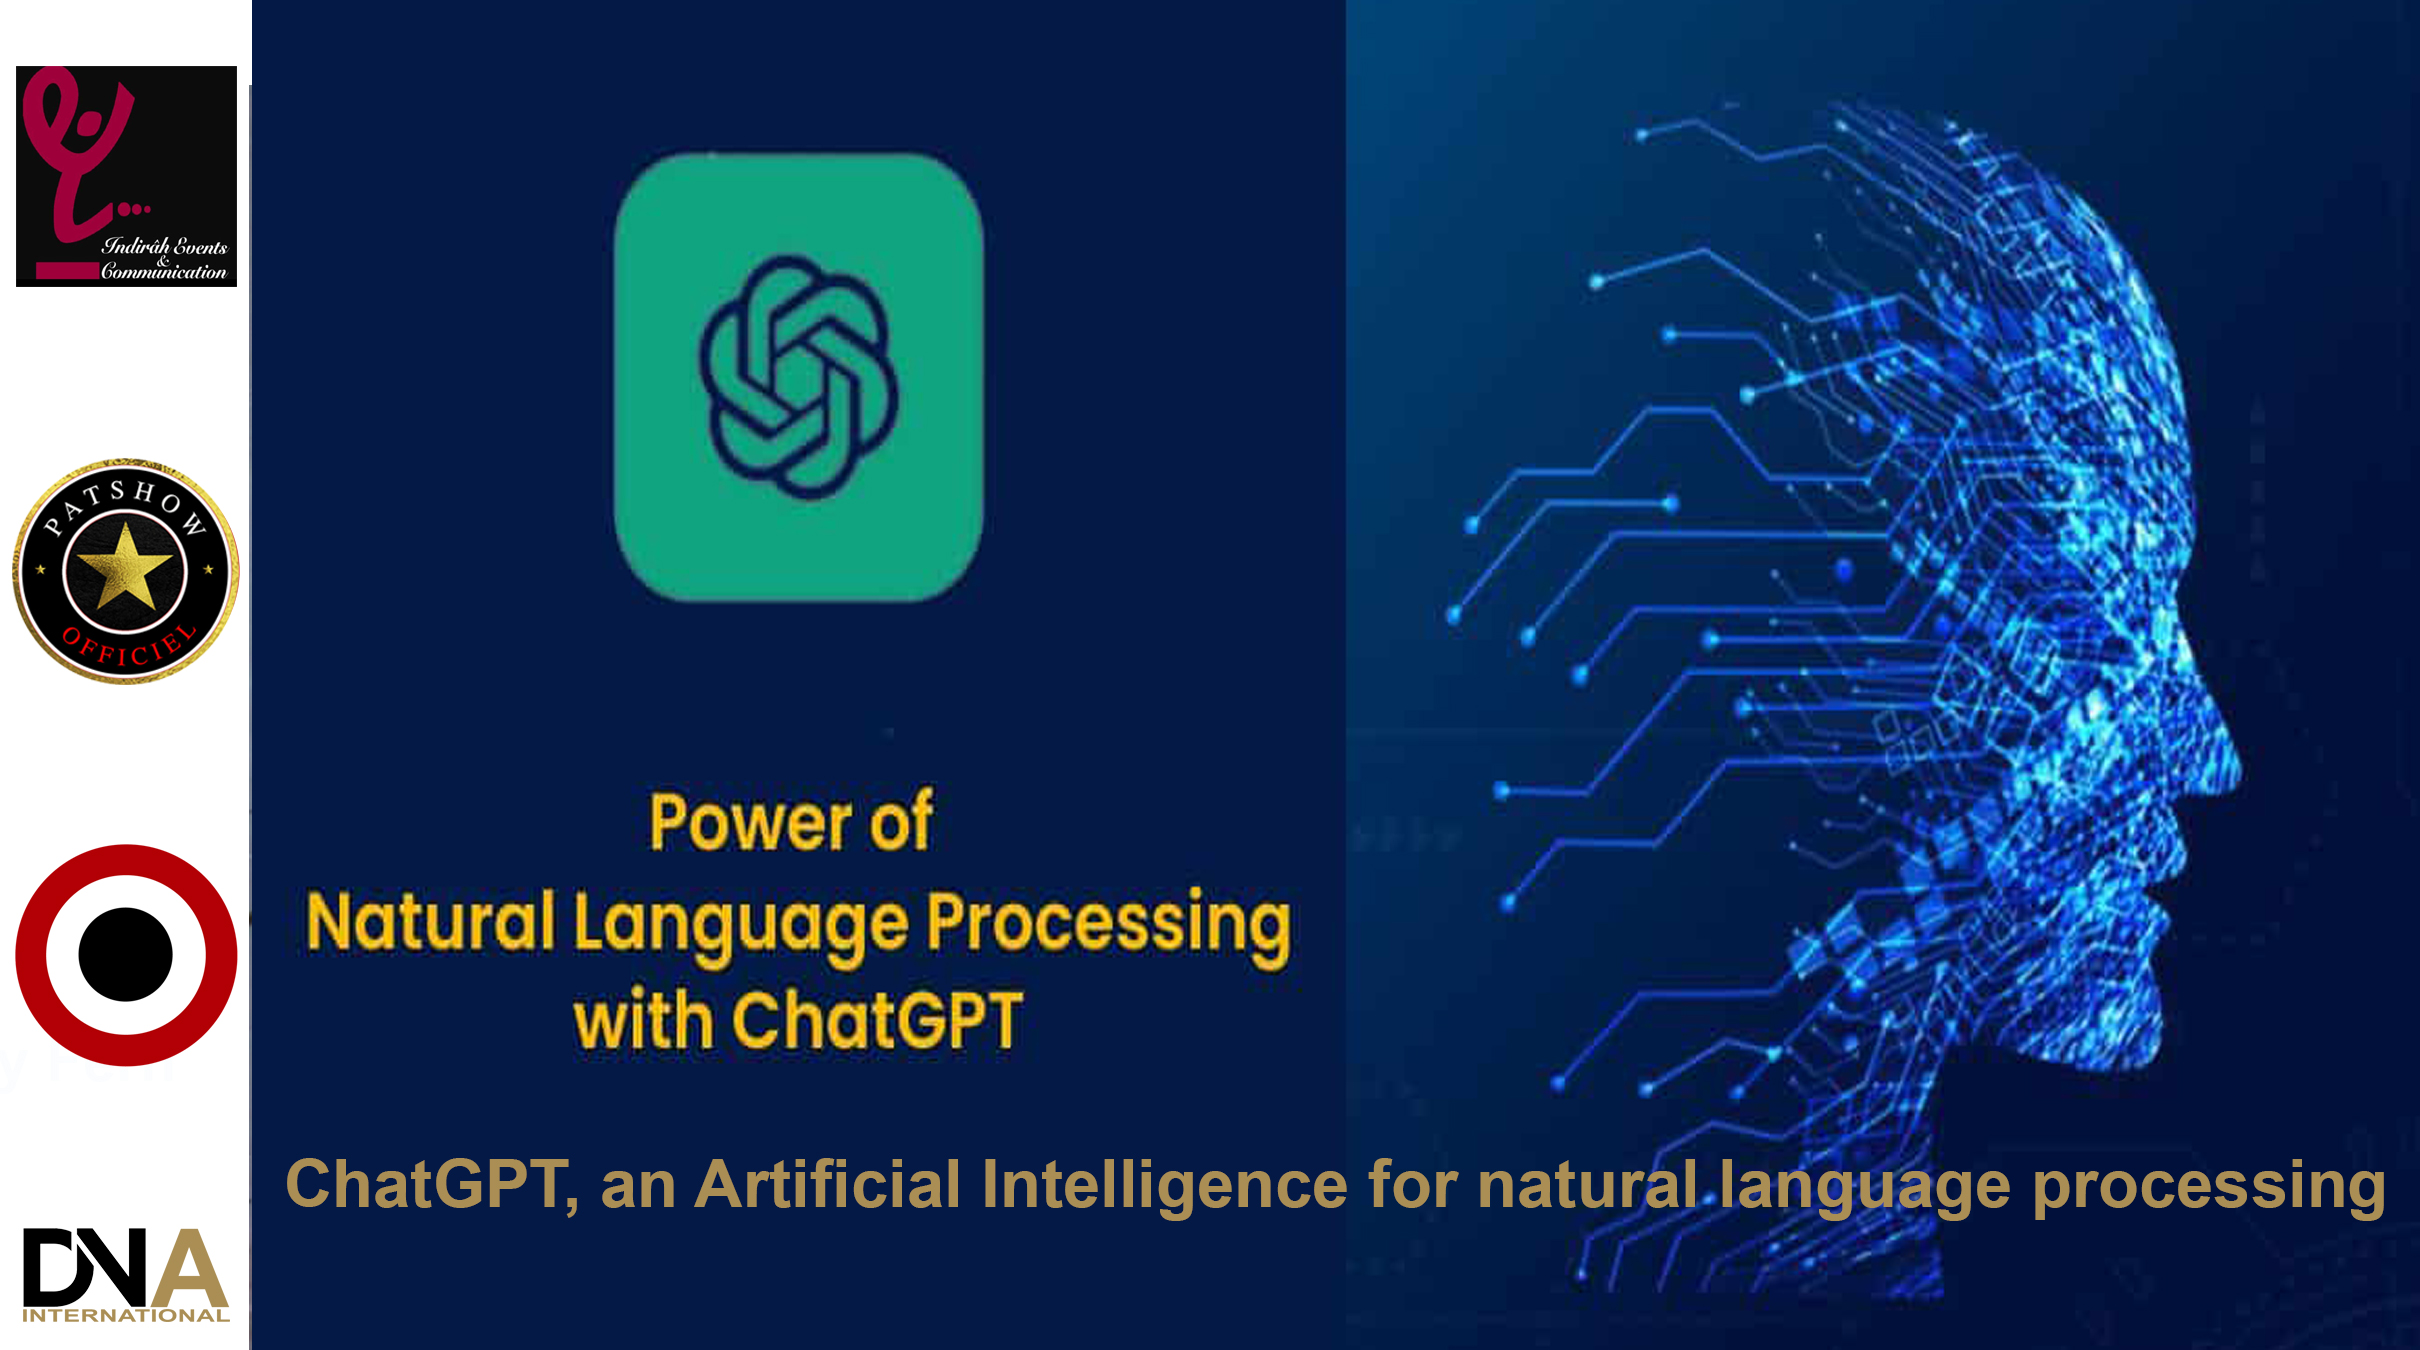 ChatGPT, an Artificial Intelligence for natural language processing